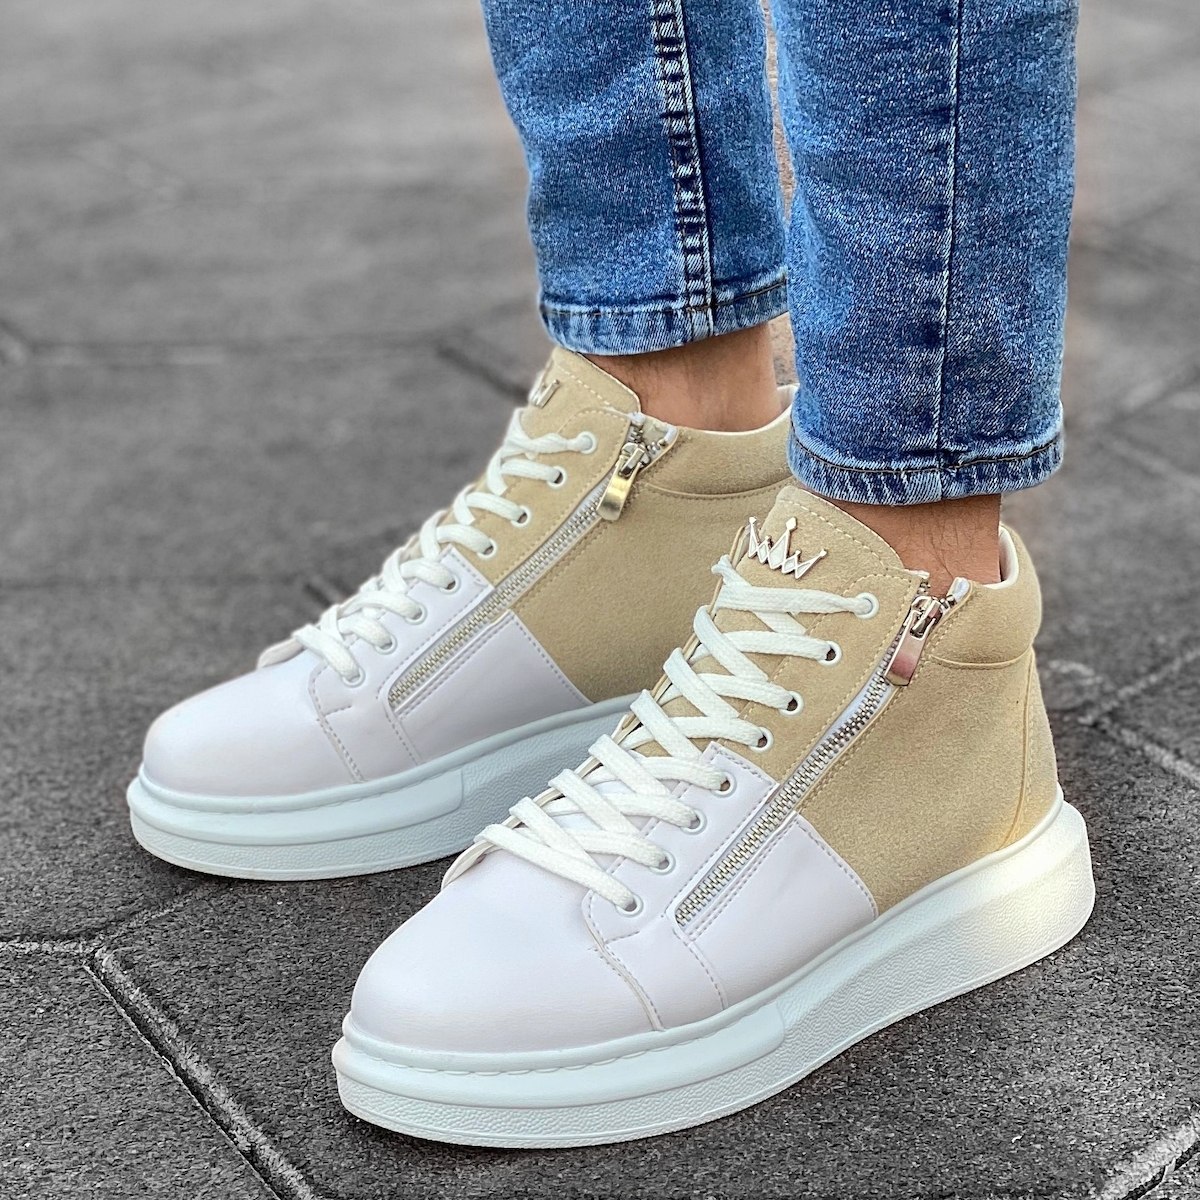 Hype Sole Zipped Style High Top Sneakers in Cream-White | Martin Valen